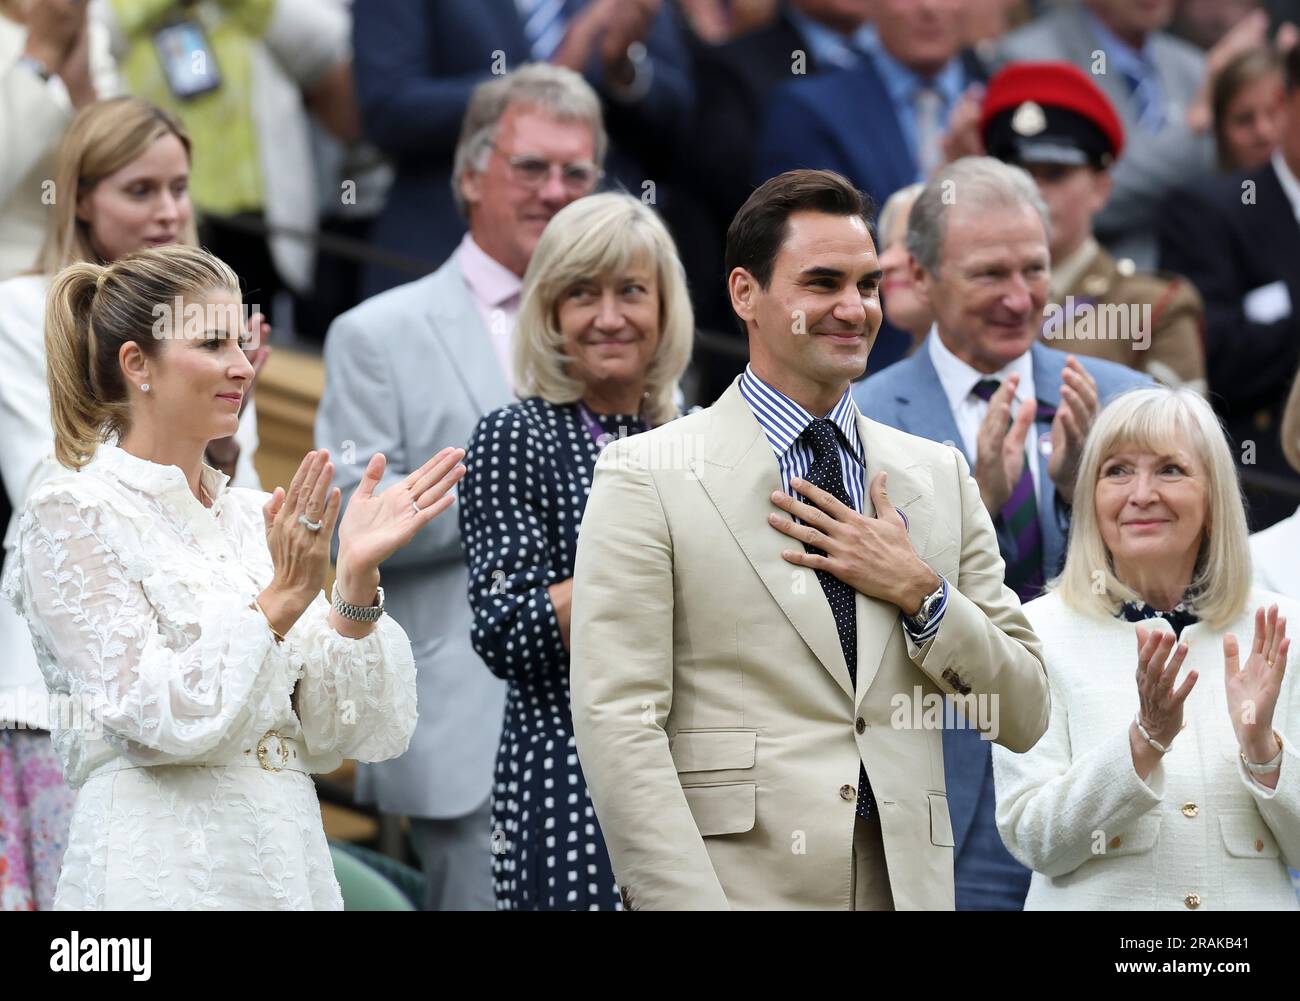 London, Britain. 4th July, 2023. Roger Federer (front C) and his wife Mirka Federer (front L) are seen at Centre Court ahead of play on Day 2 of Wimbledon Tennis Championships in London, Britain, July 4, 2023. Credit: Han Yan/Xinhua/Alamy Live News Stock Photo